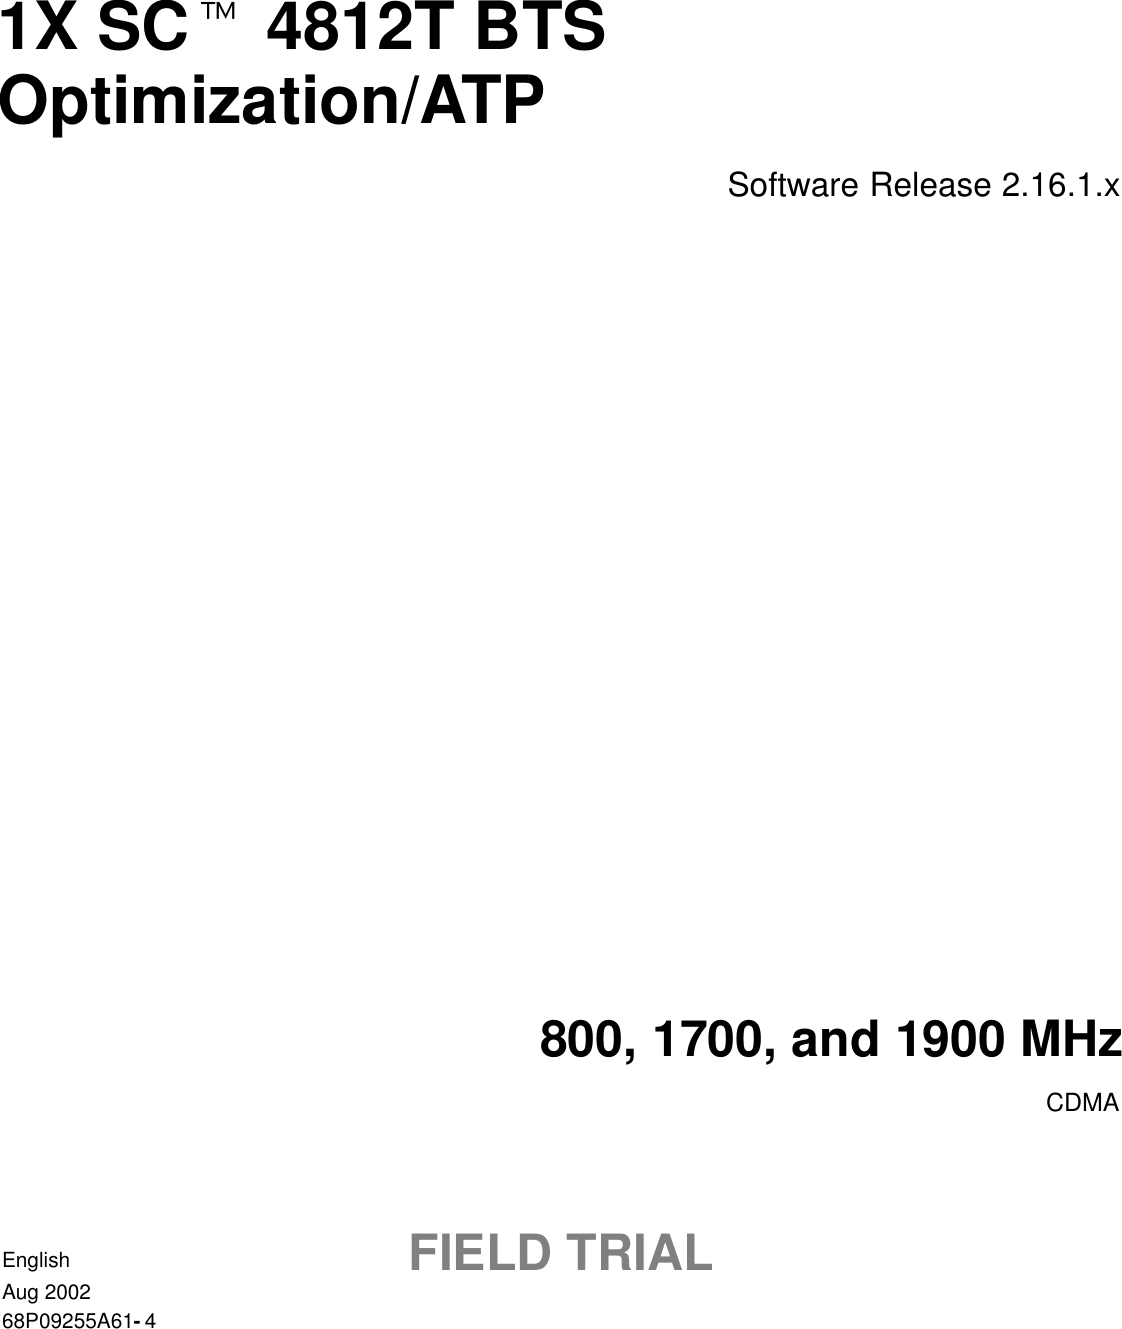 1X SCt 4812T BTSOptimization/ATPSoftware Release 2.16.1.x800, 1700, and 1900 MHzCDMAEnglishAug 200268P09255A61-4FIELD TRIAL